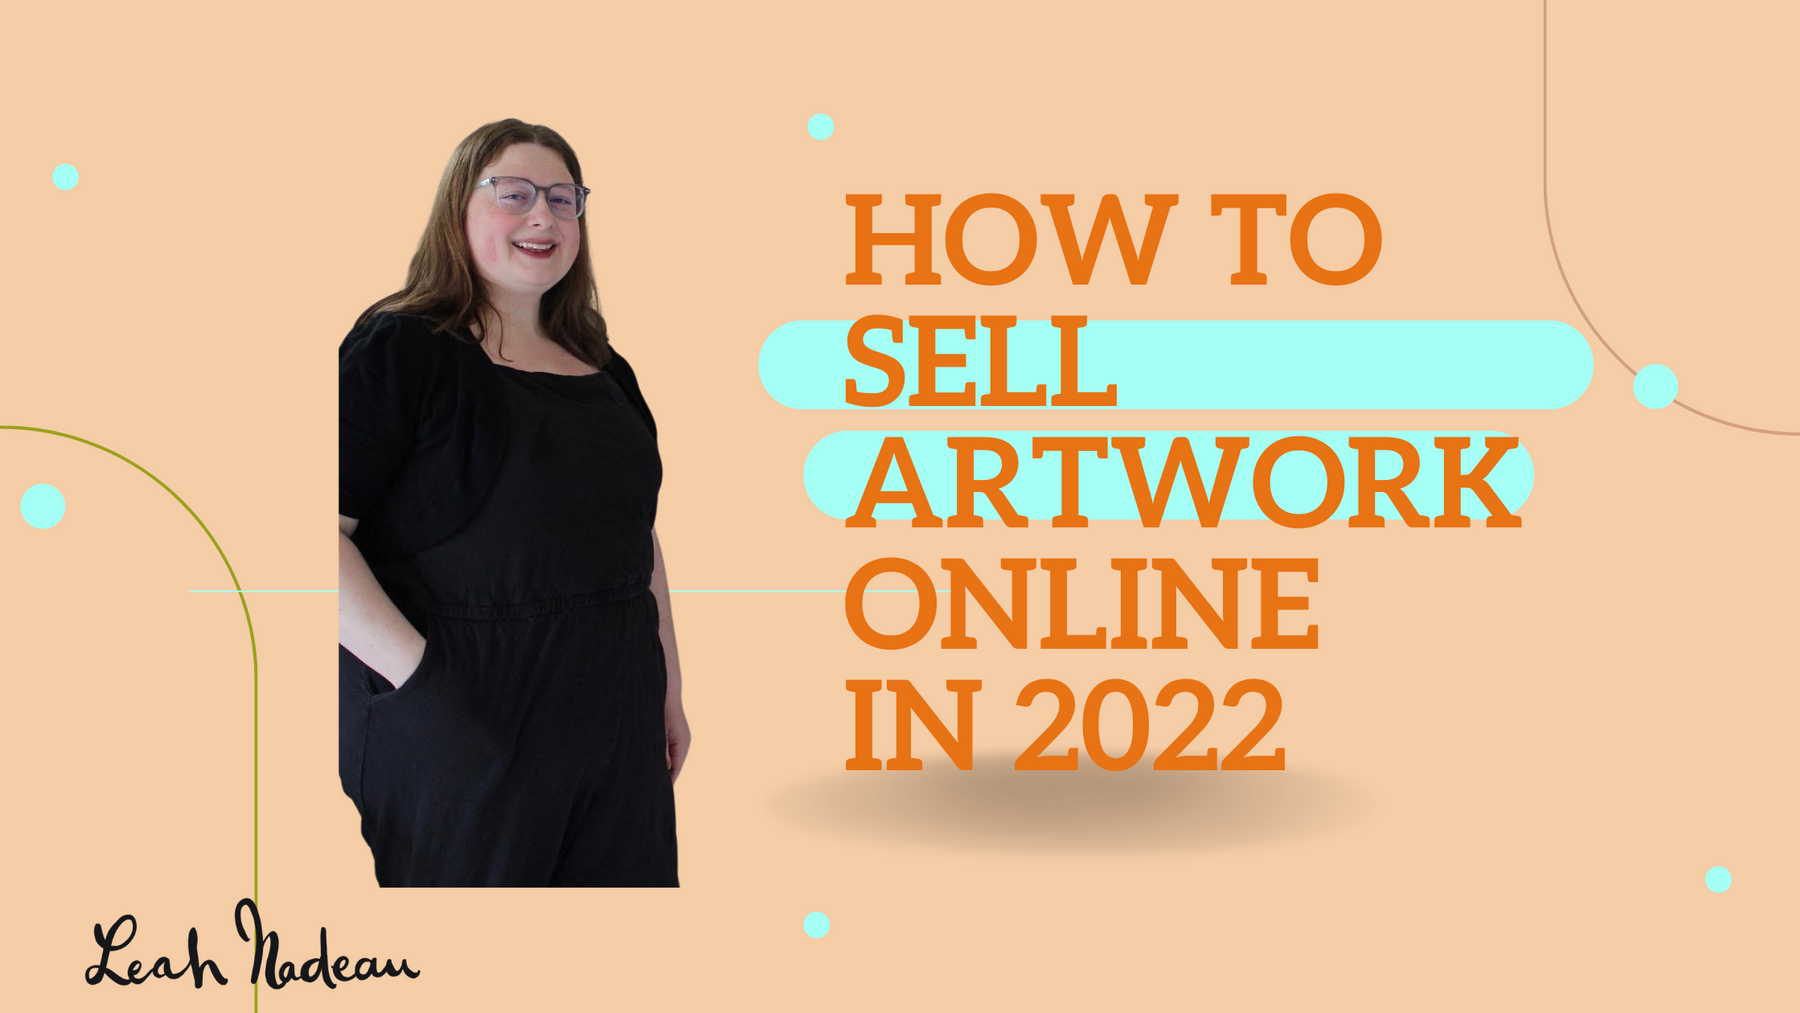 How to Sell Artwork Online in 2022